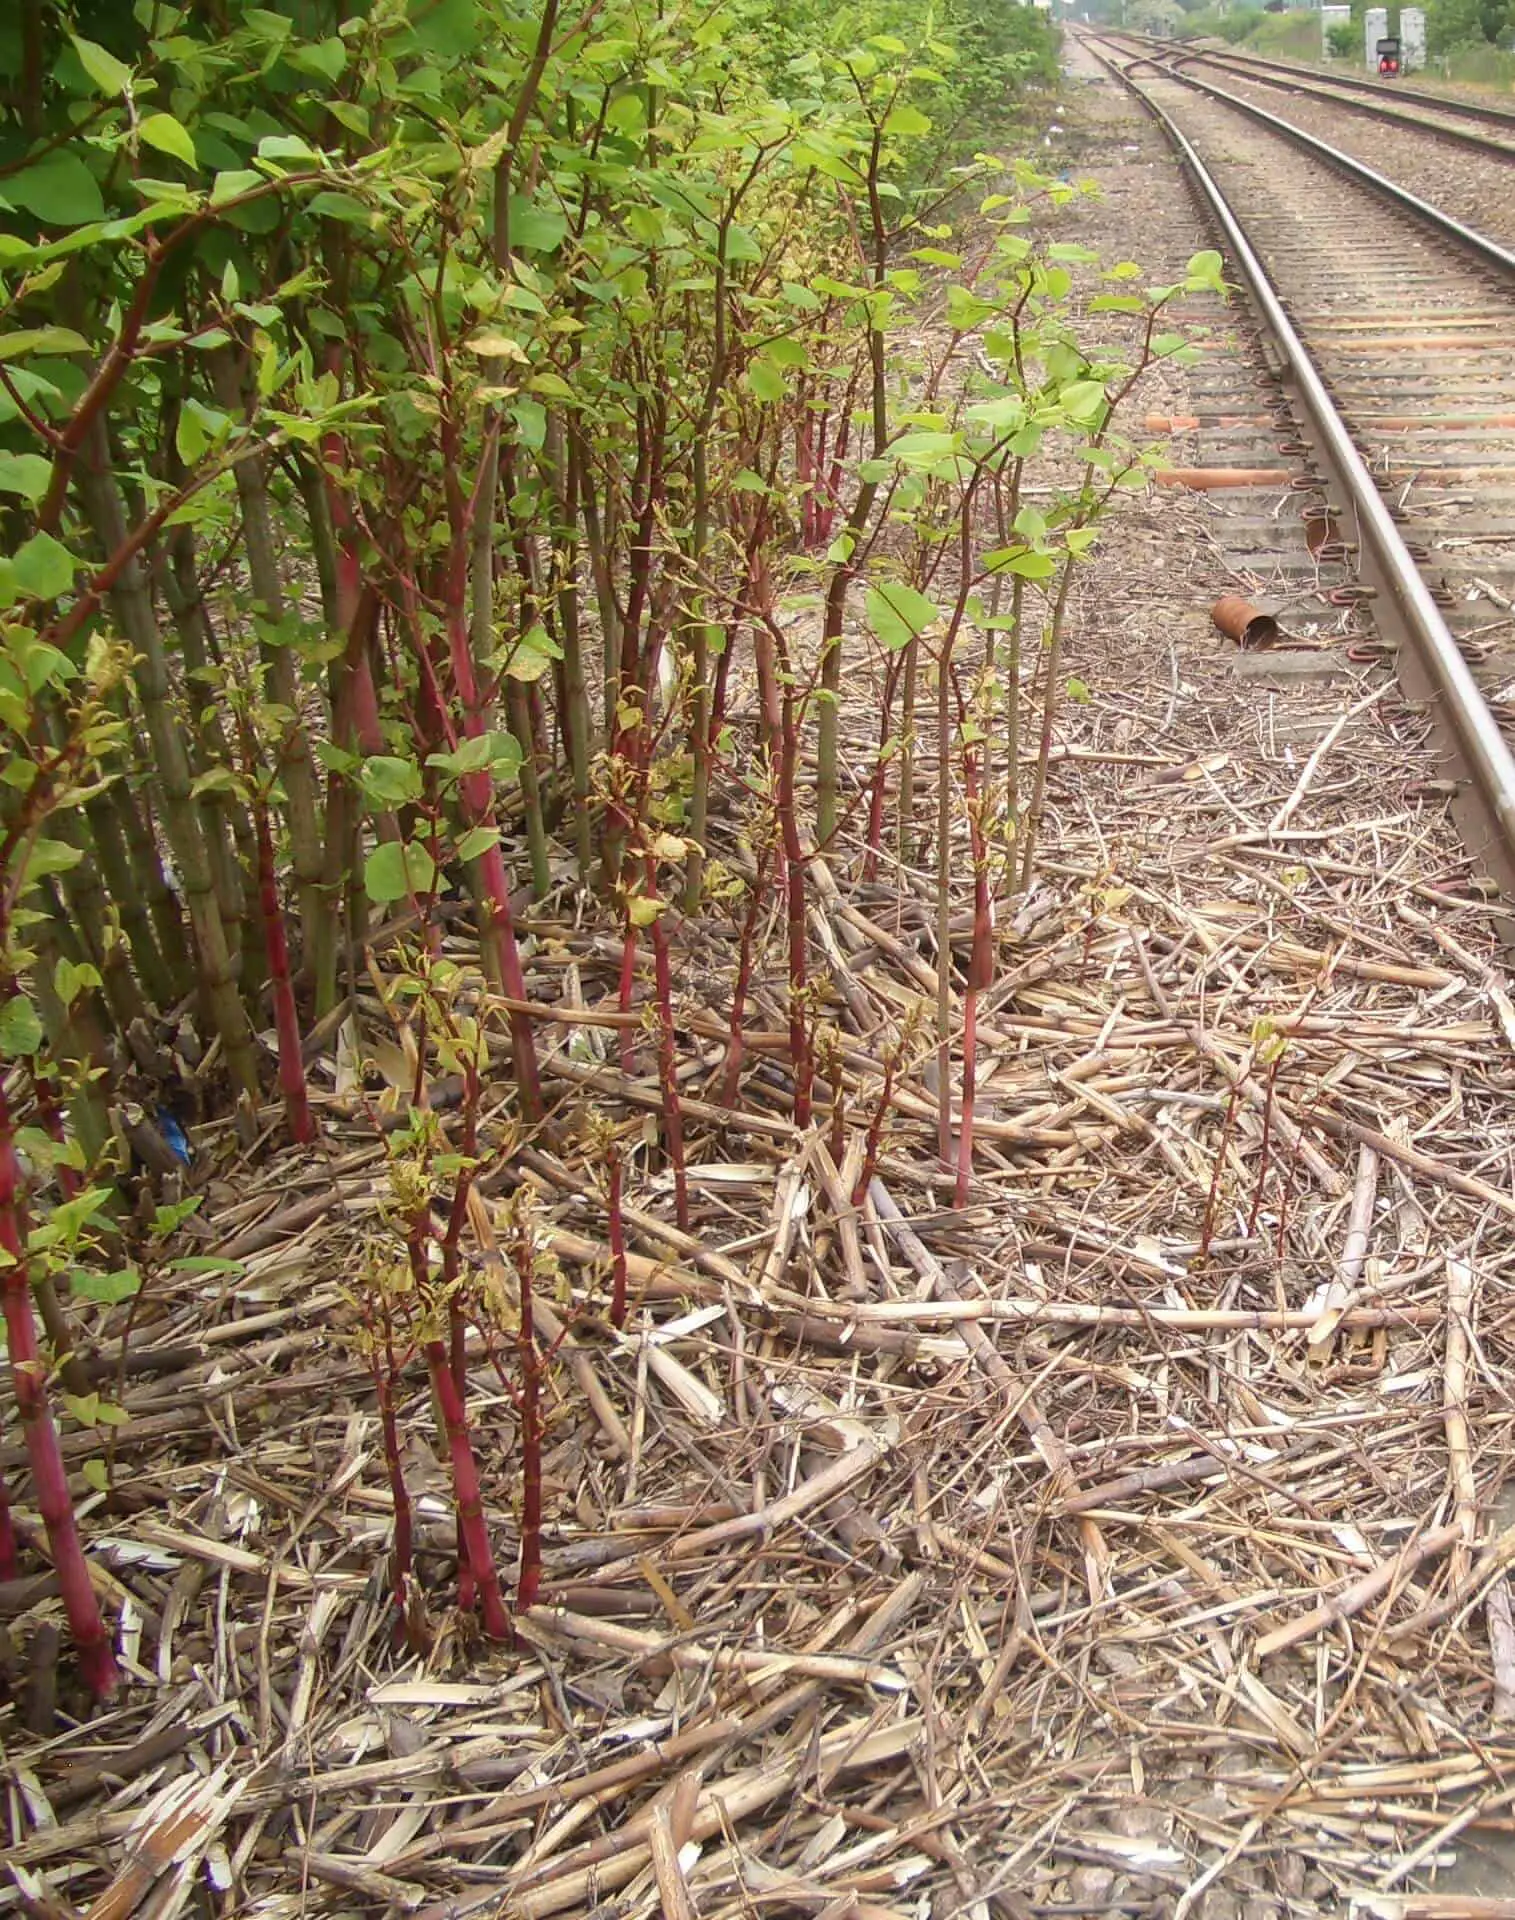 Japanese knotweed actively growing on the embankments of a railway track